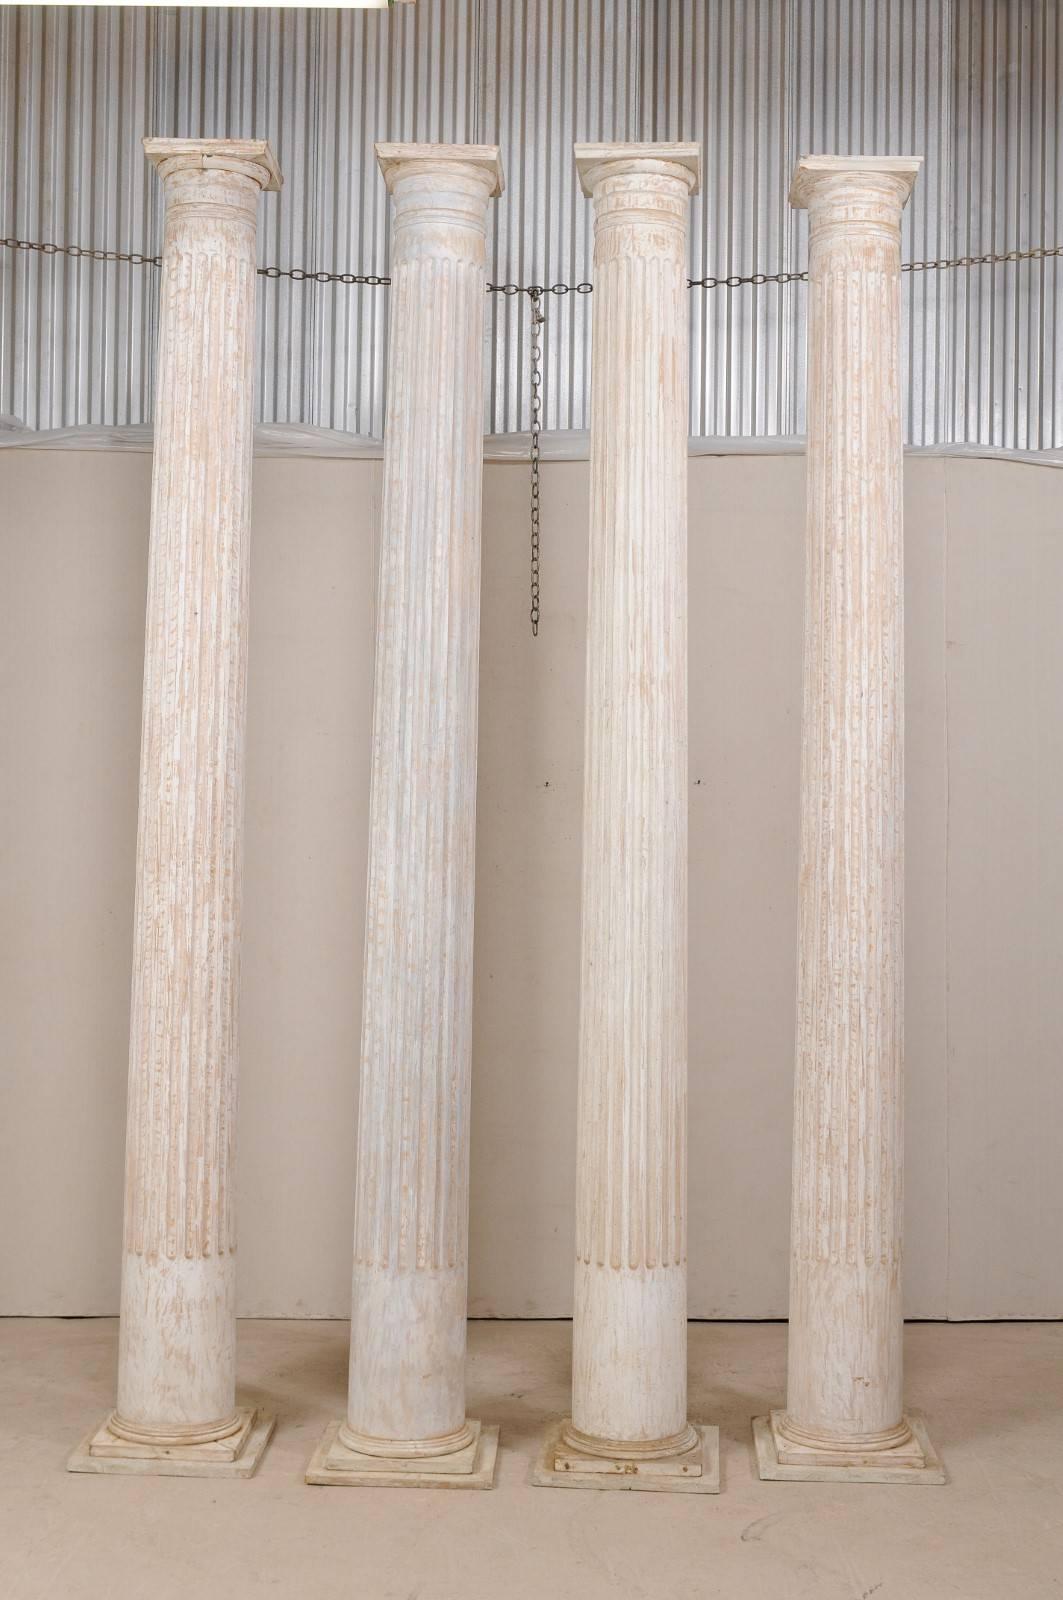 A set of four American mid-20th century Greek Doric style fluted columns. This set of columns, from the early to mid-20th century, stand at an impressive 10.5 feet in height. They are fashioned in the Greek Doric style, rounded columns with carved